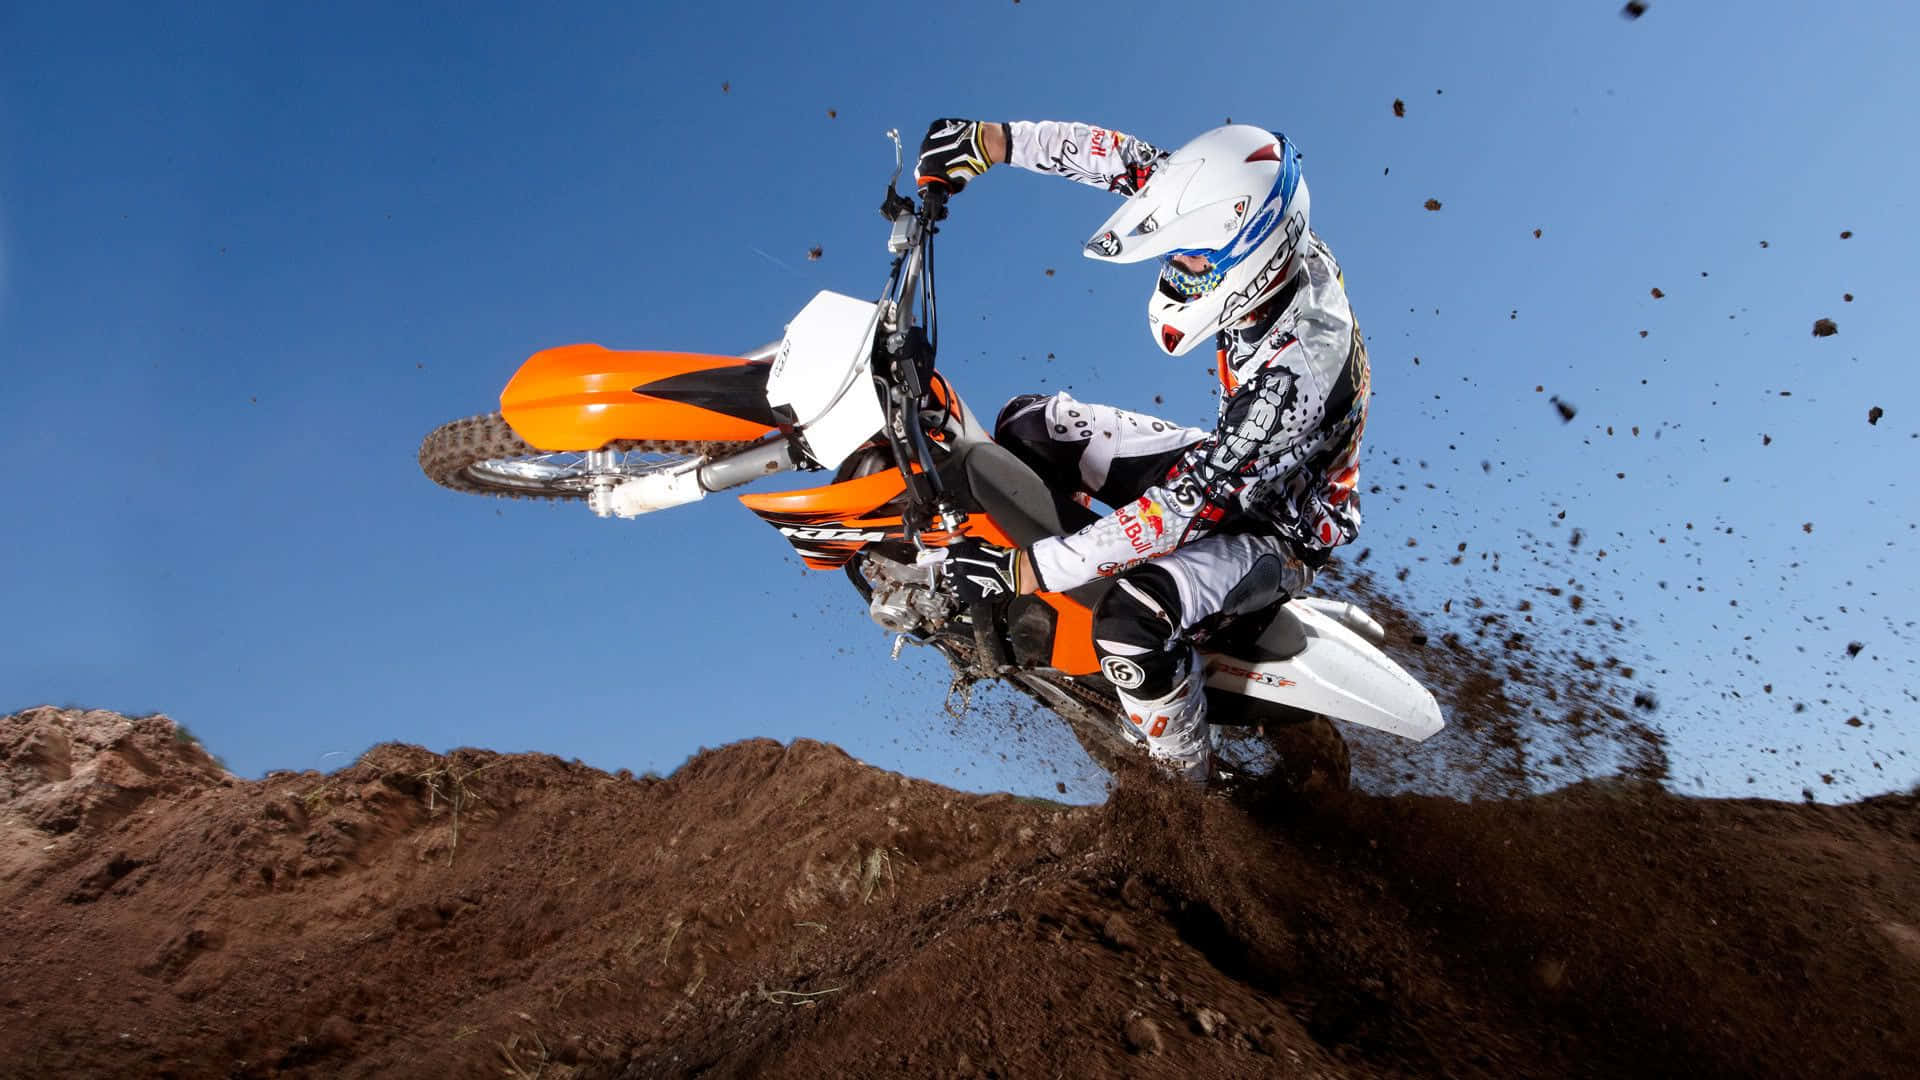 Riding The Adventure: Ktm Bike In Action Wallpaper